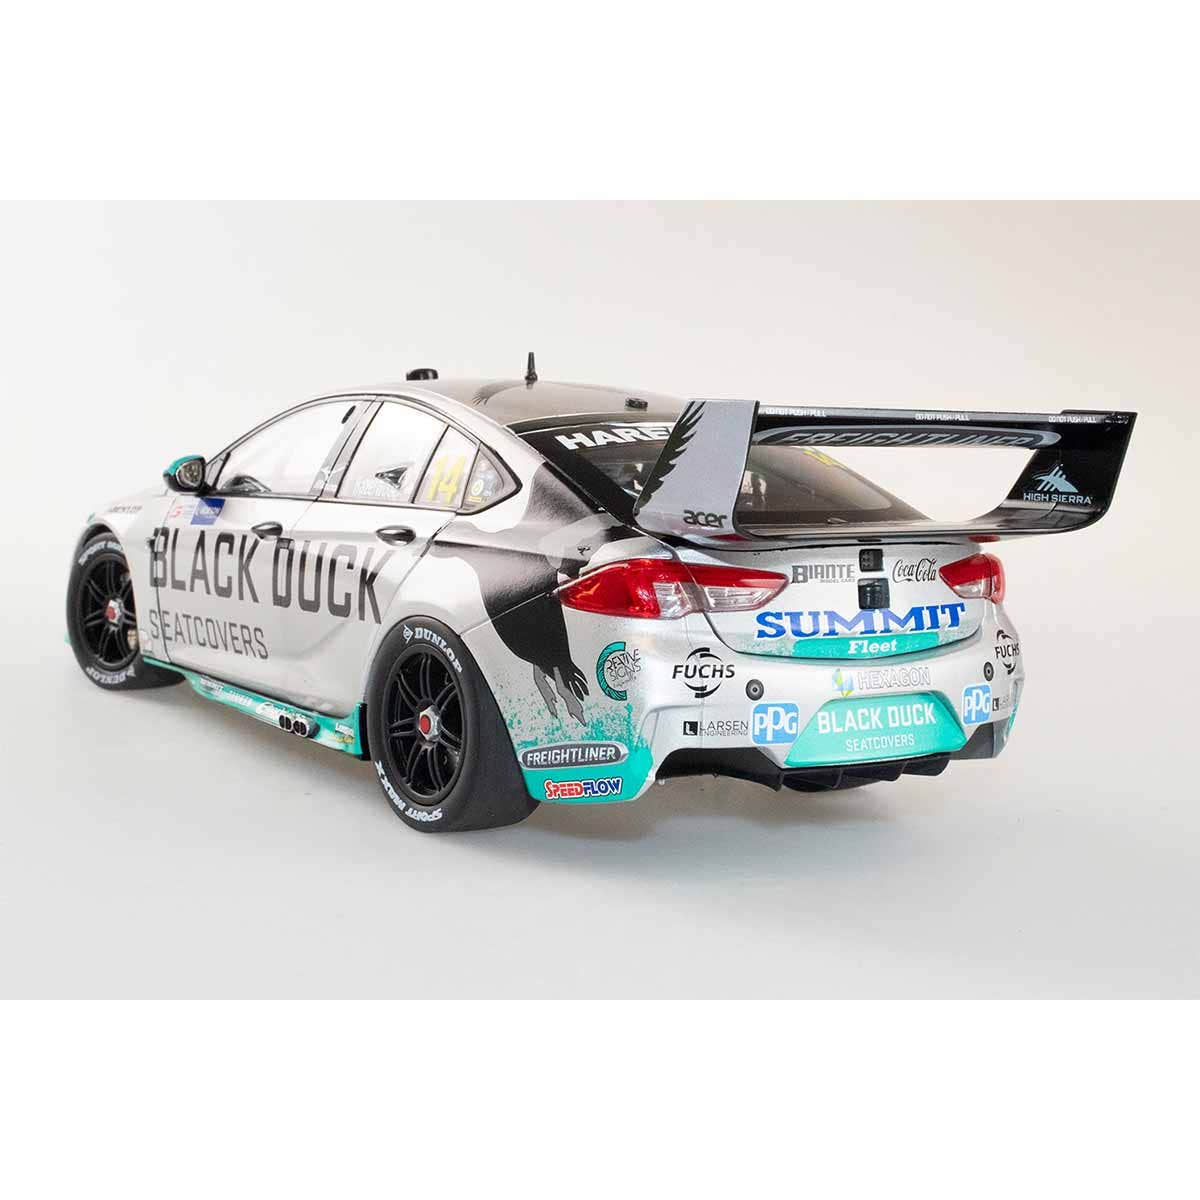 Holden ZB Commodore - Team Black Duck - #14, T.Hazelwood - Pole Position, Race 24, Robson Civil Projects Townsville SuperSprint - 1:18 Scale Diecast Model Car